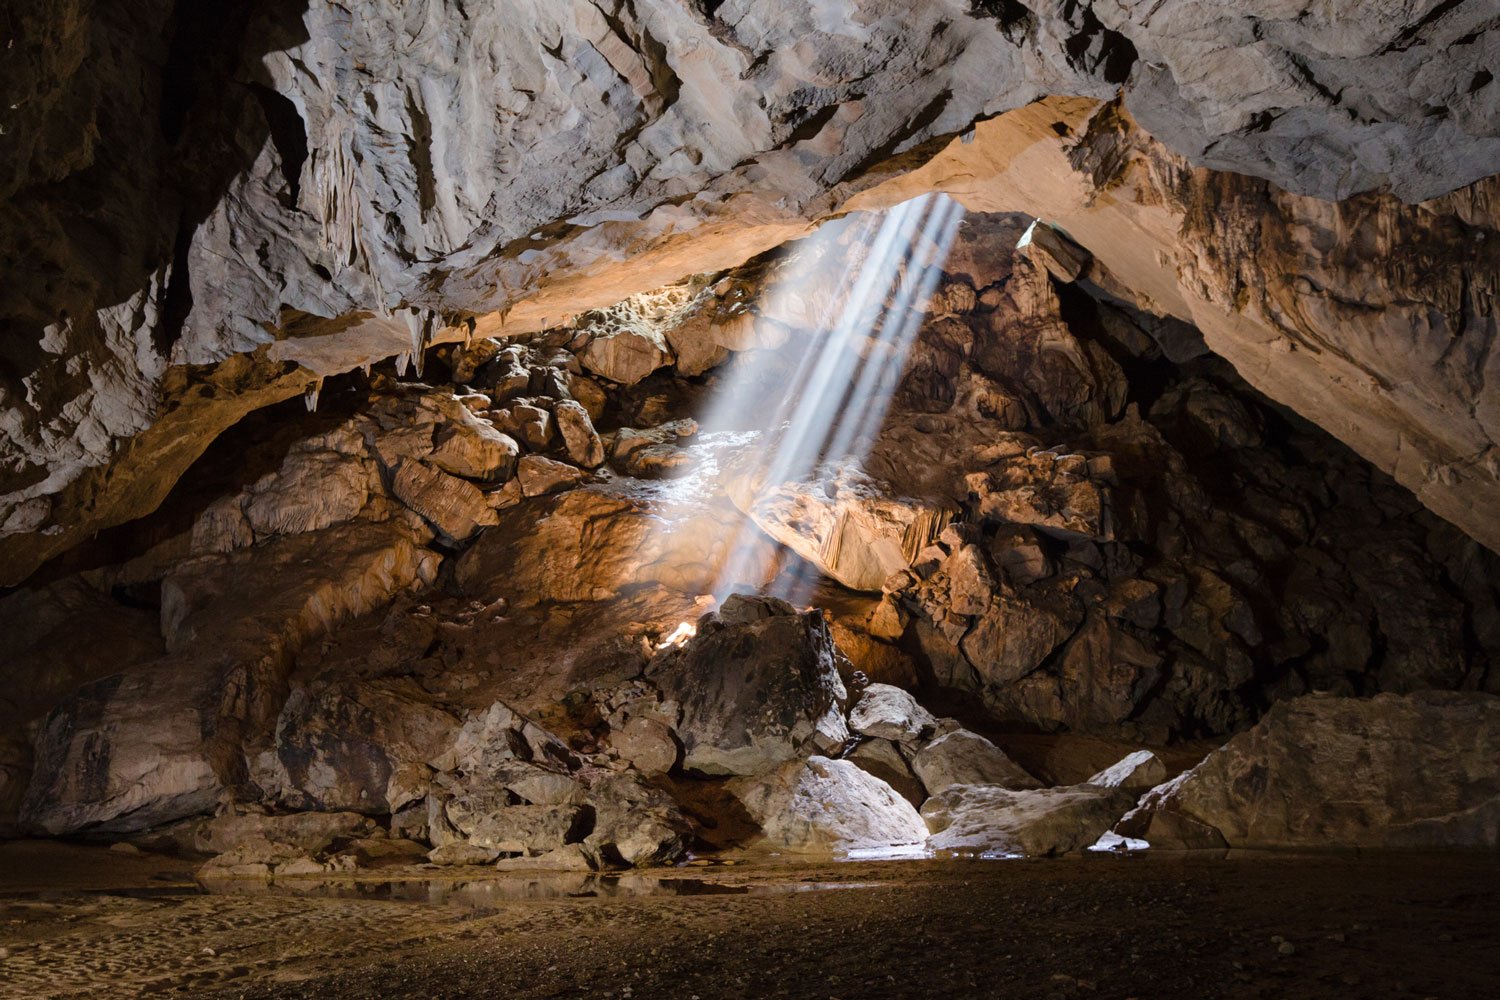 You can enjoy the mystical rays of sunlight shining through the sinkhole of Nuoc Nut Cave during the spring season.